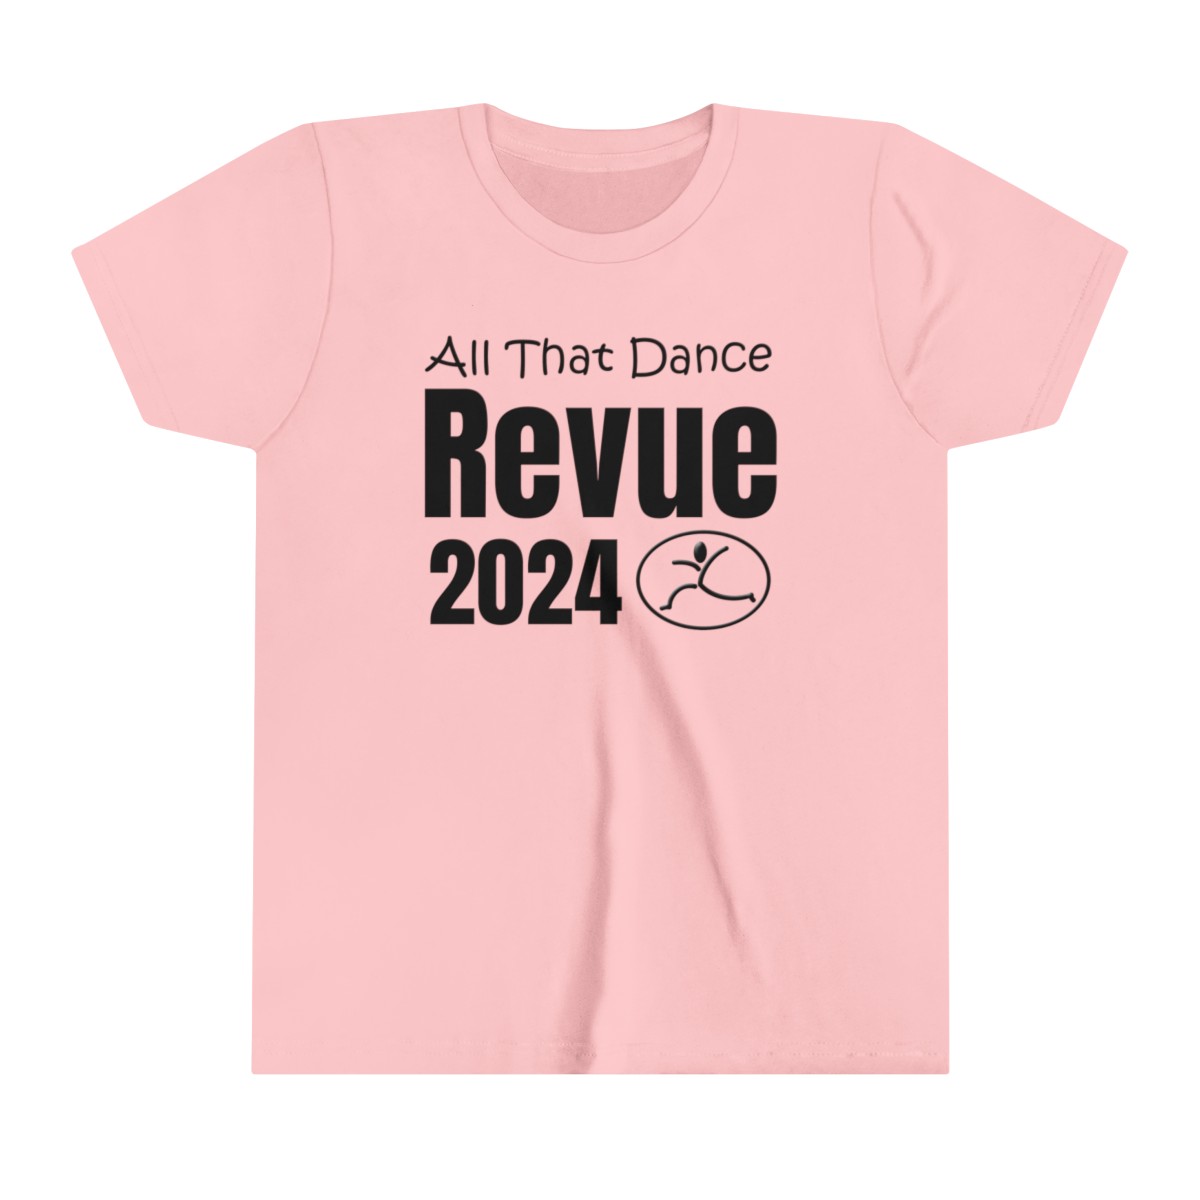 Youth Sizes - All That Dance Revue 2024 Tshirt product main image